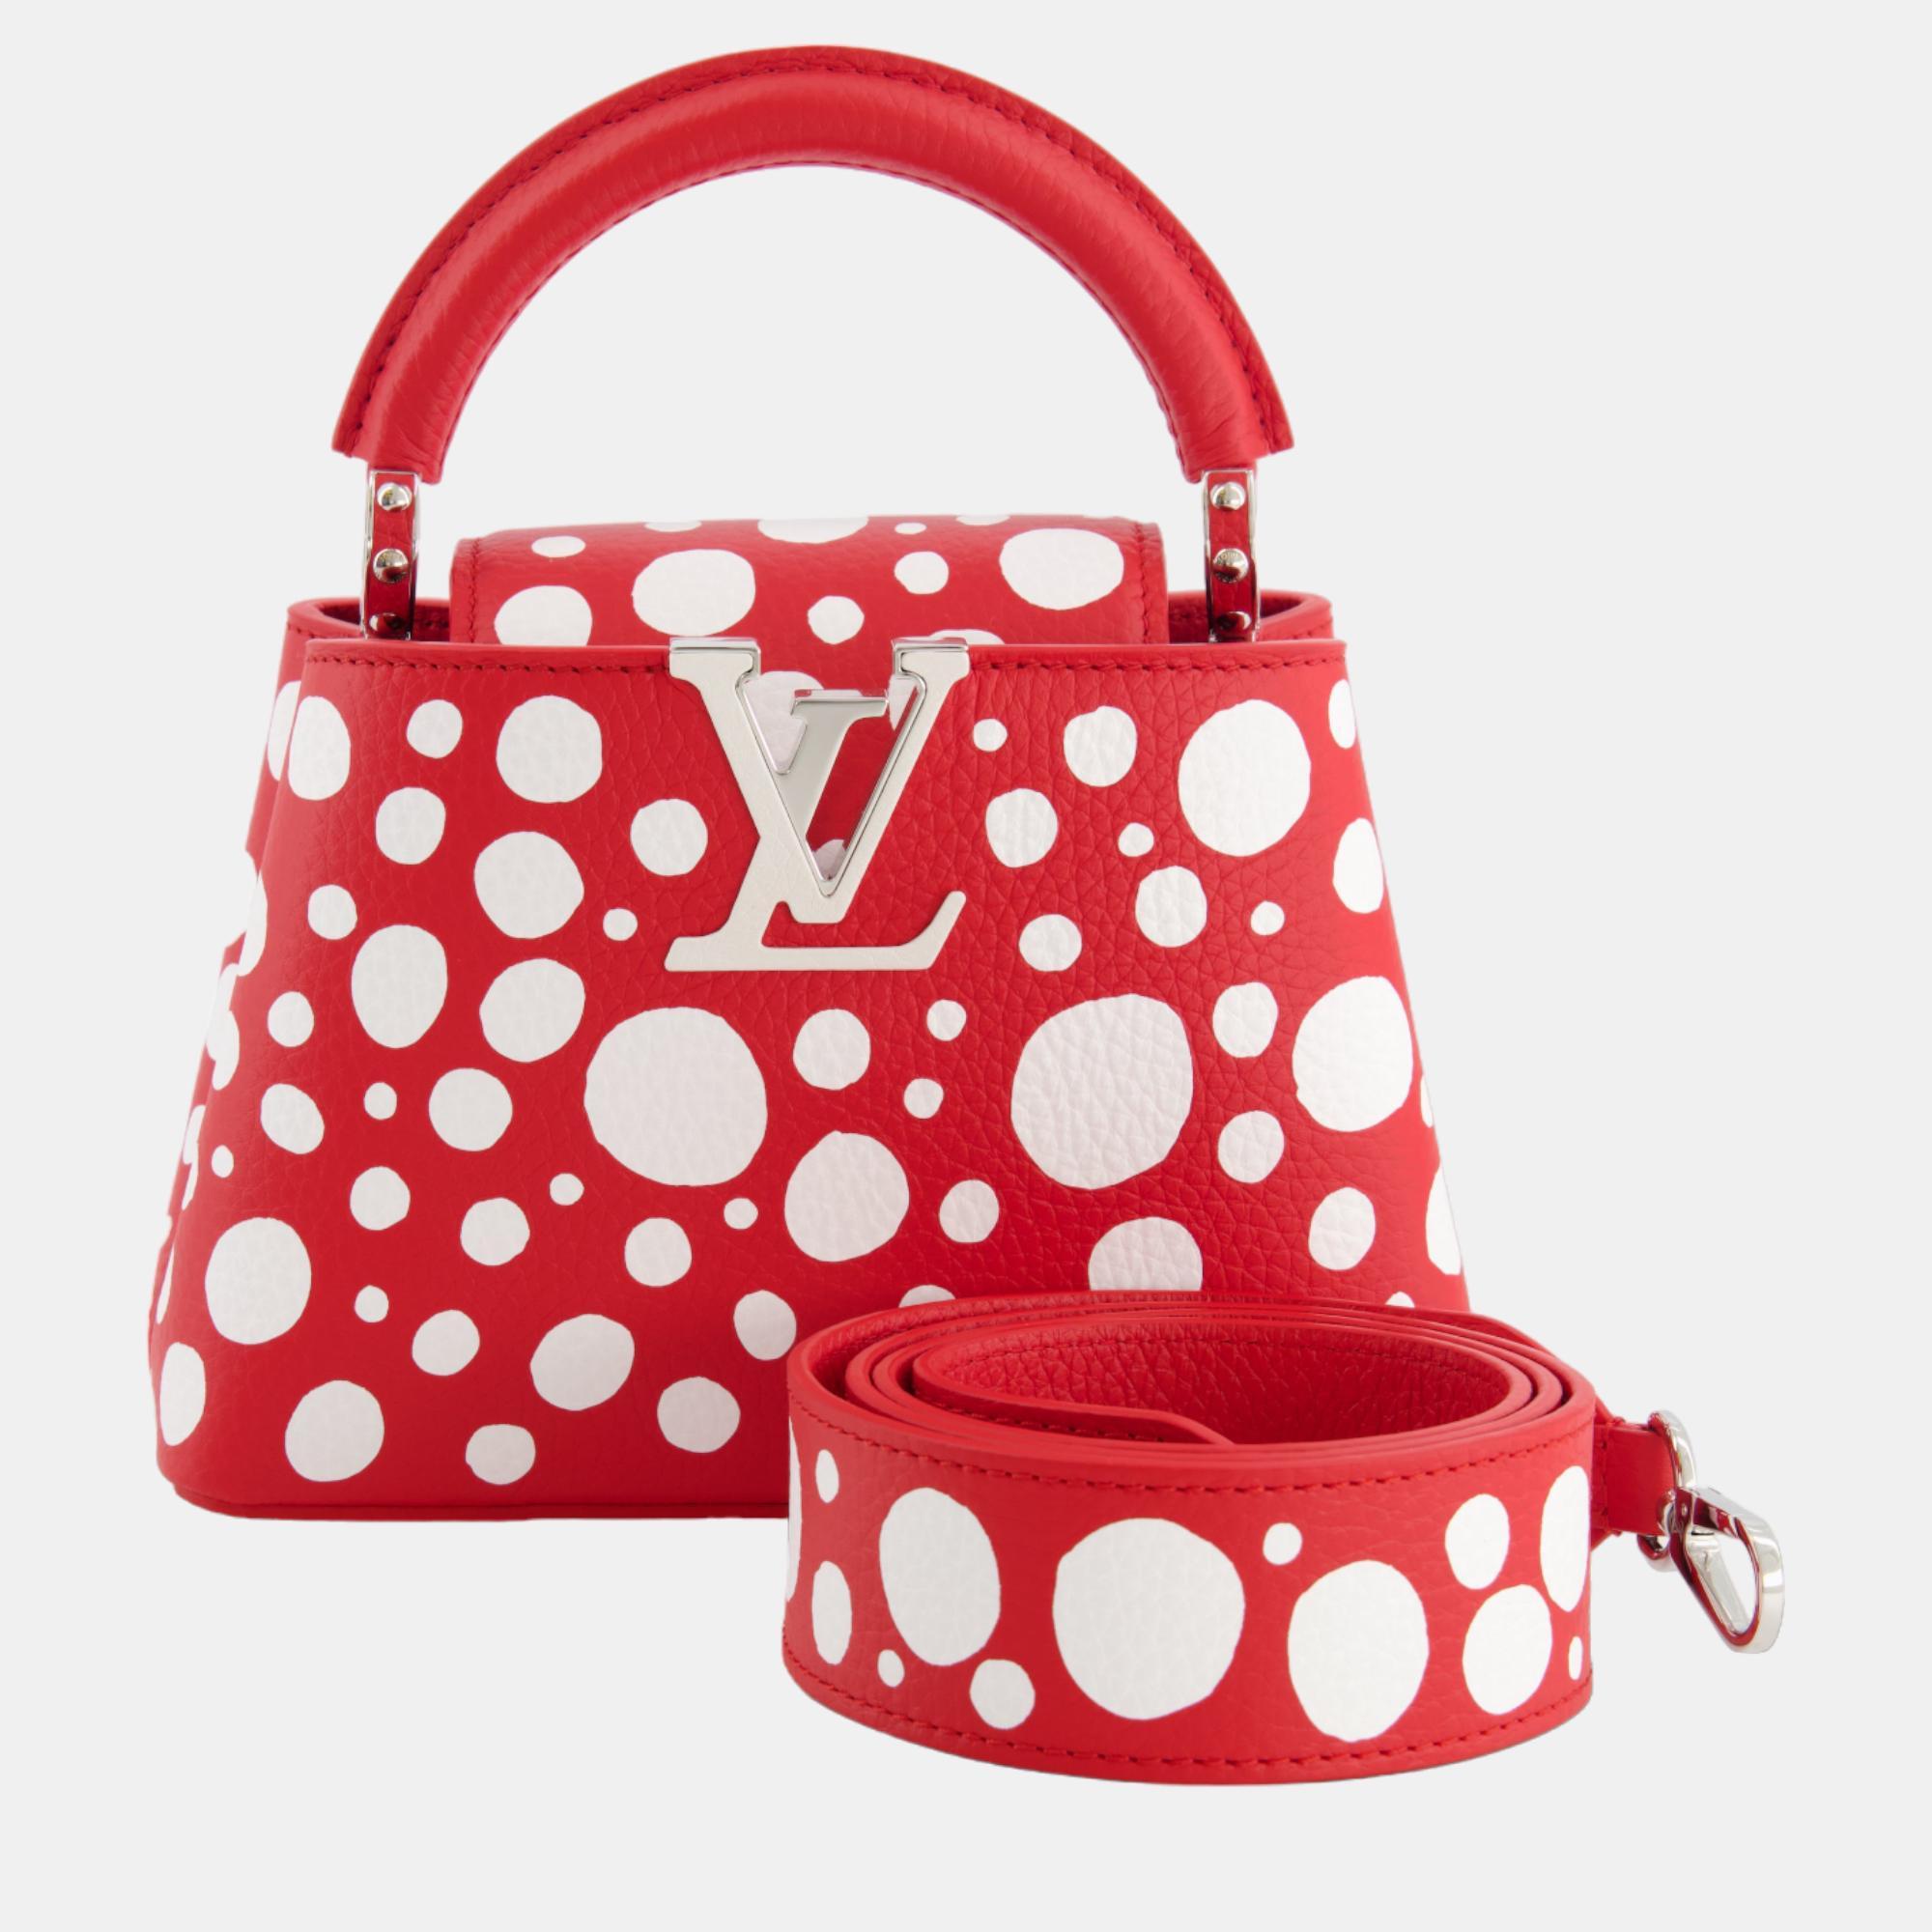 Louis Vuitton X Yayoi Kusama Red And White Mini Capucines Bag With Silver Hardware